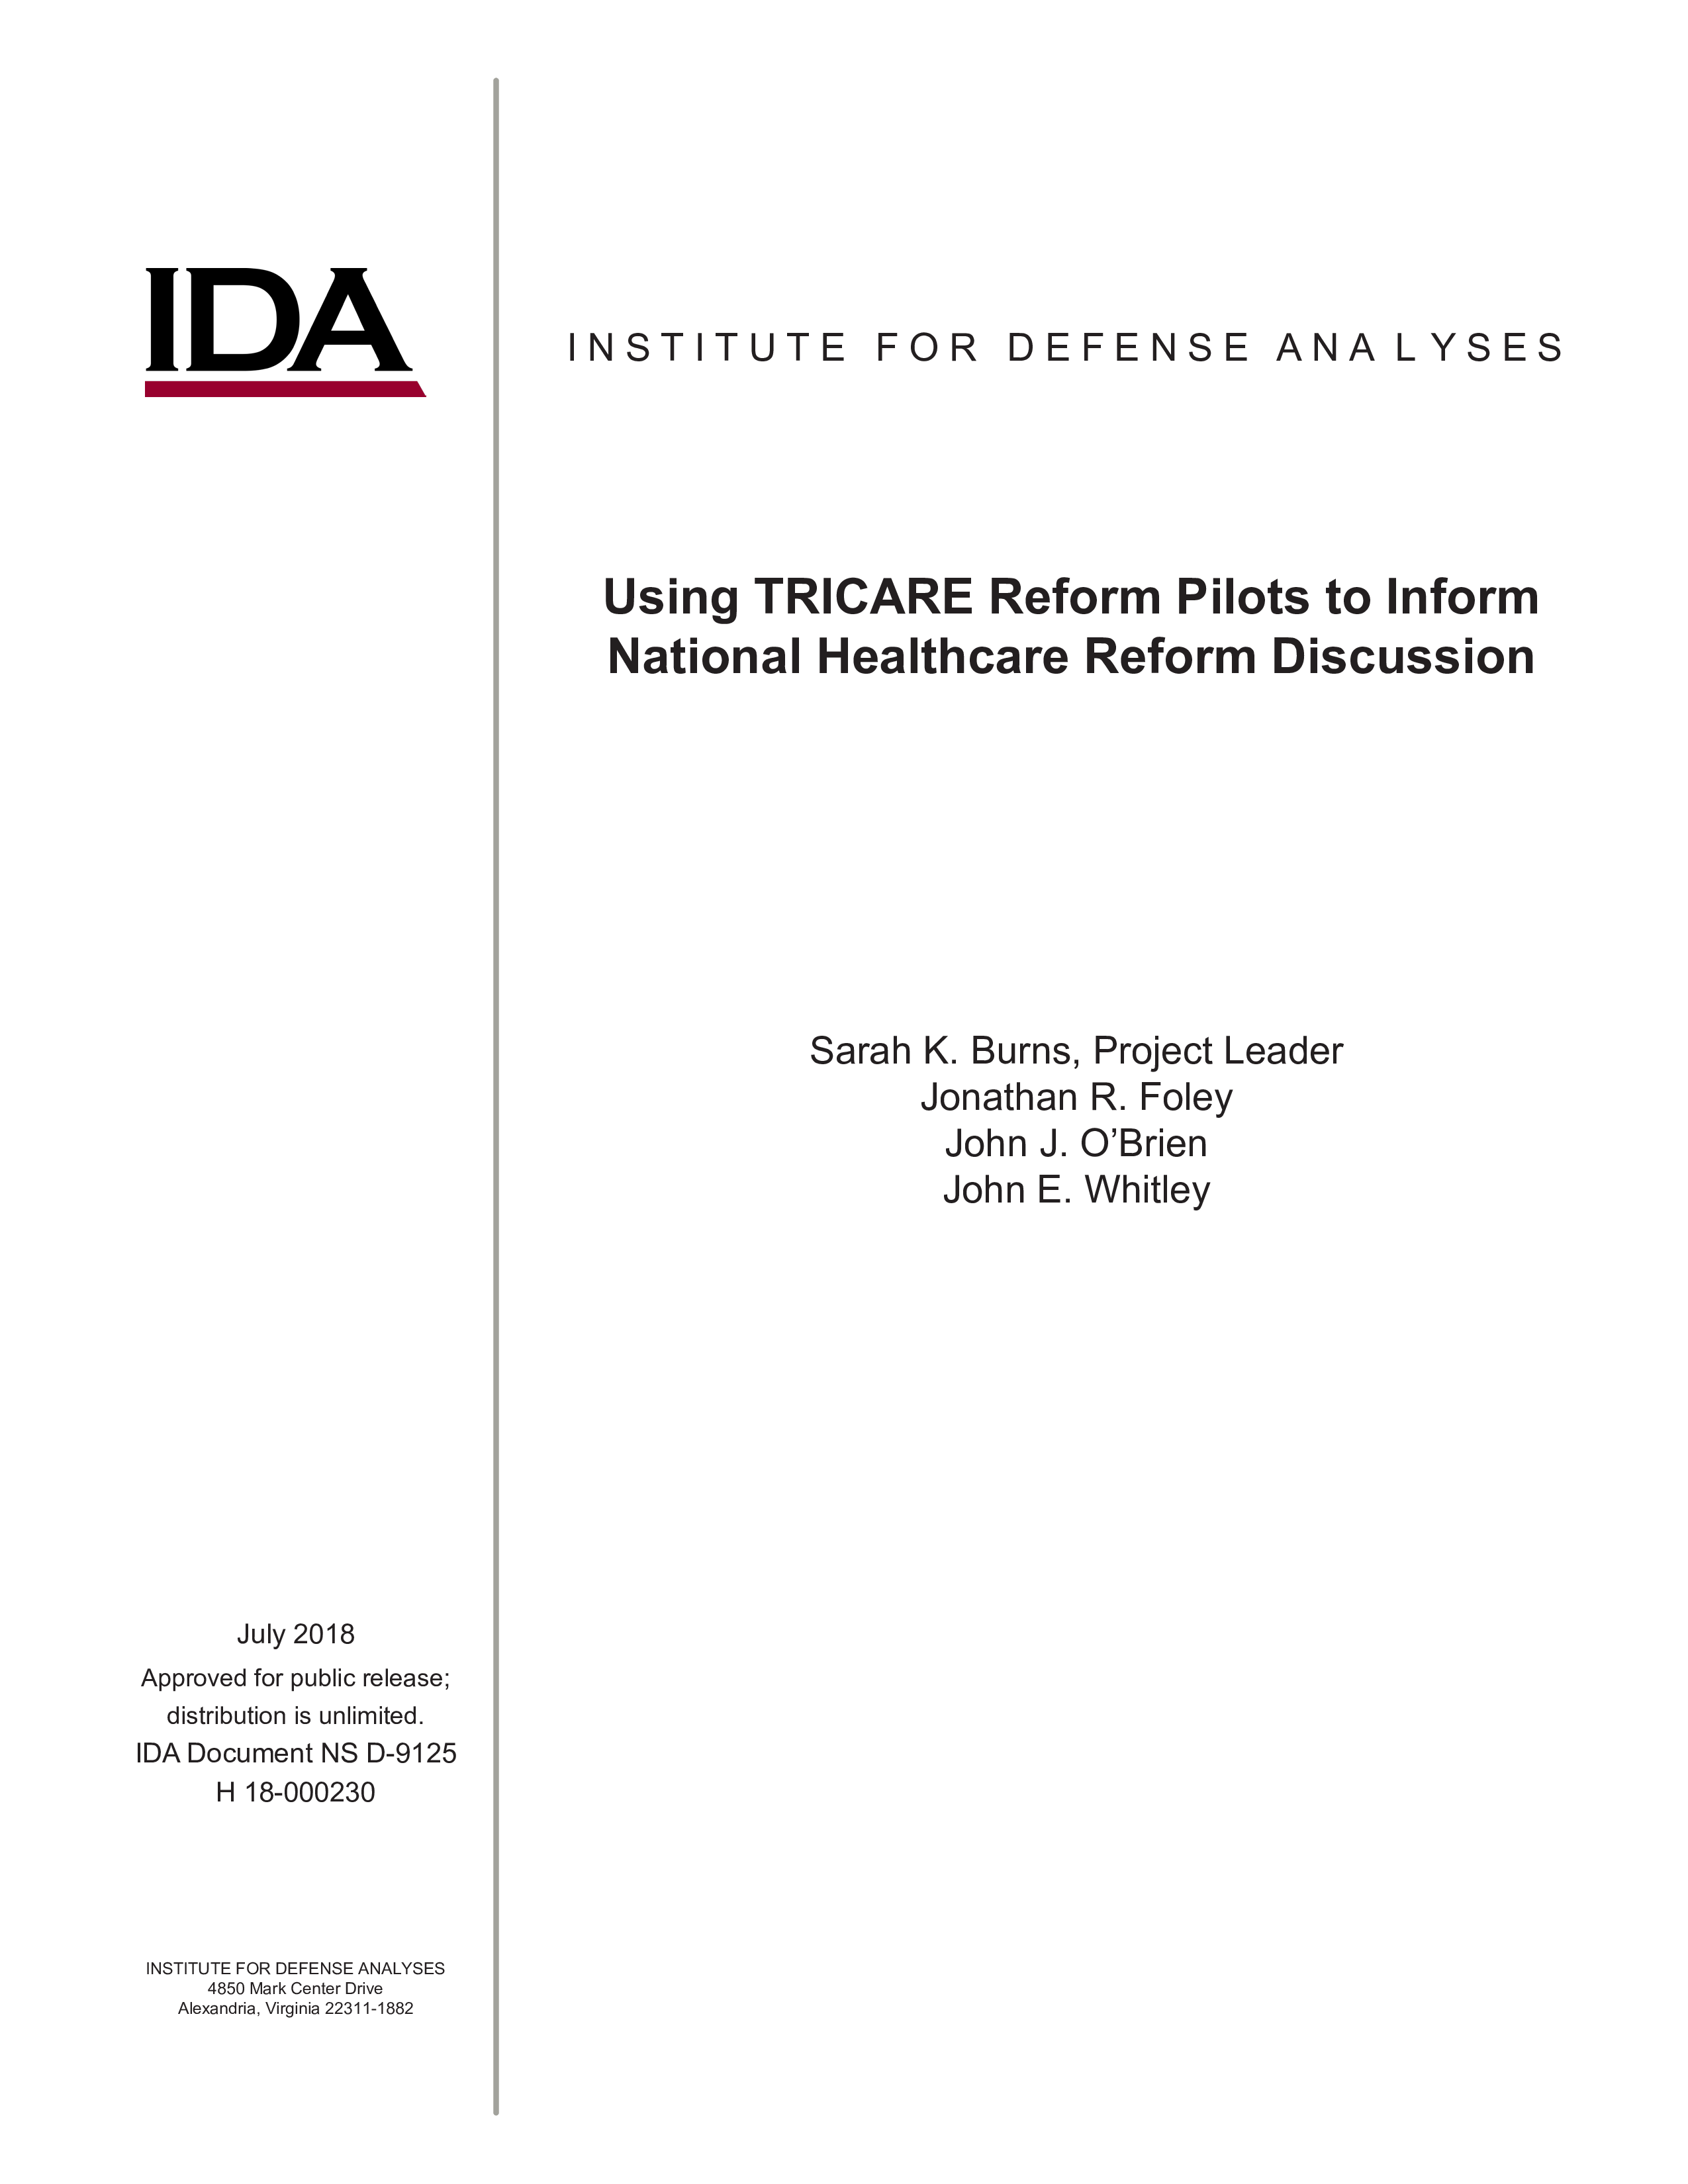 Using TRICARE Reform Pilots to Inform National Healthcare Reform Discussion